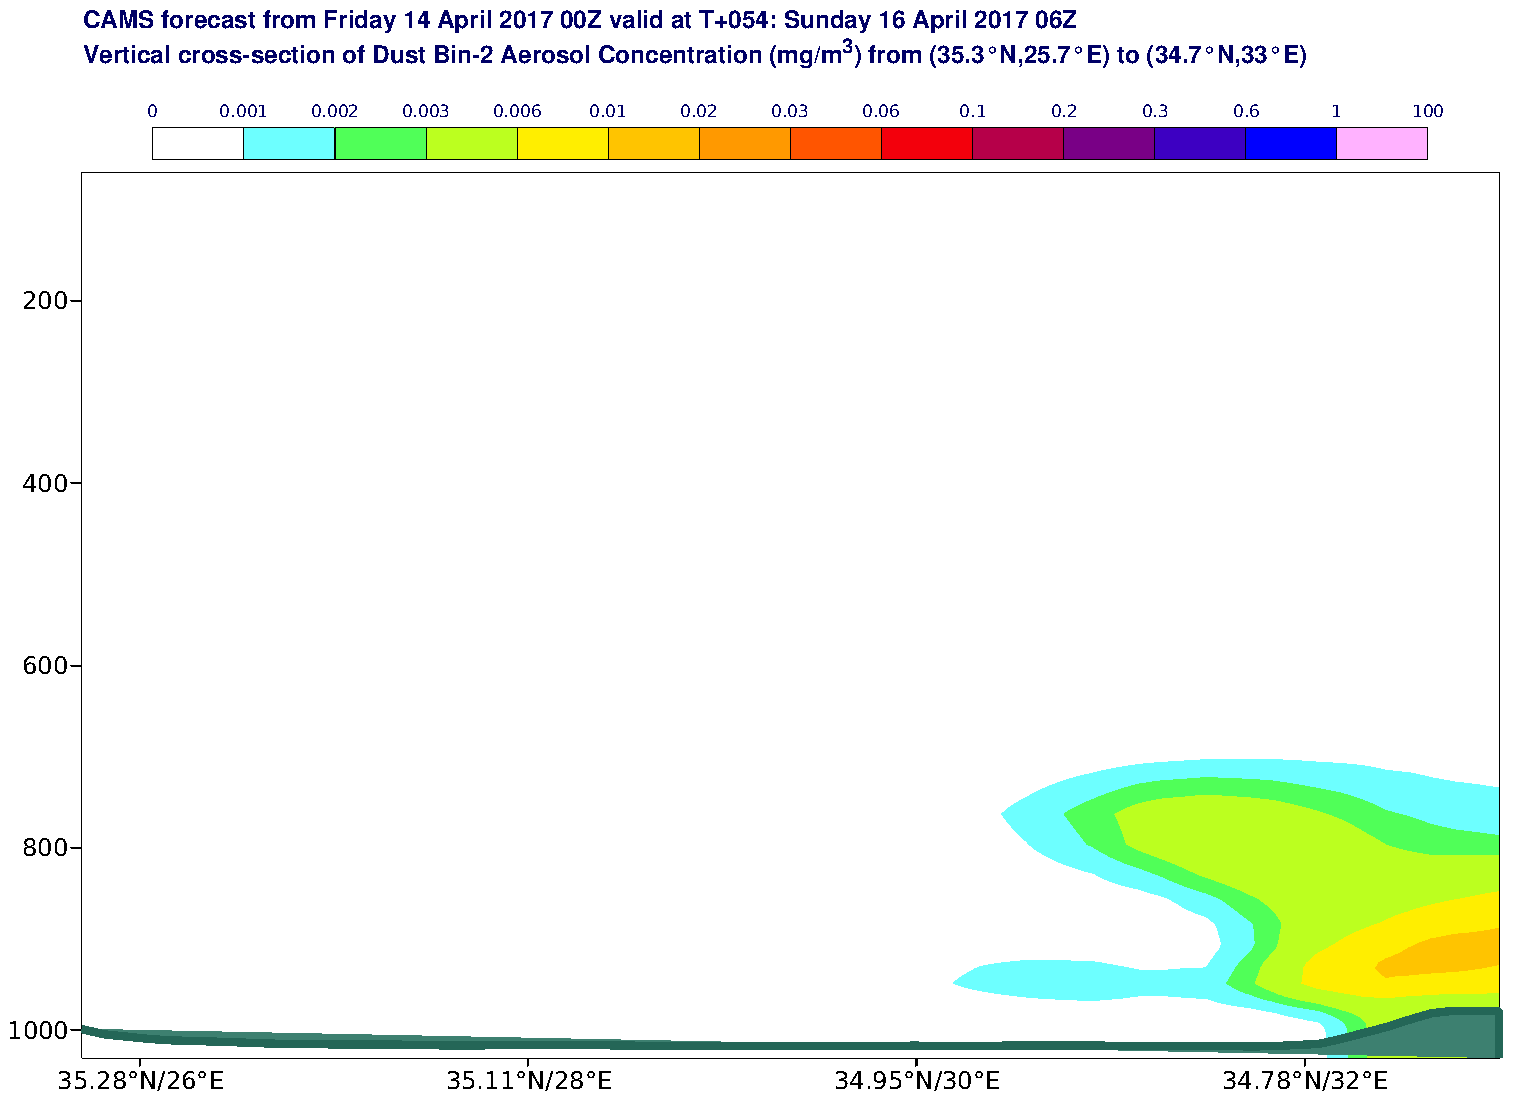 Vertical cross-section of Dust Bin-2 Aerosol Concentration (mg/m3) valid at T54 - 2017-04-16 06:00